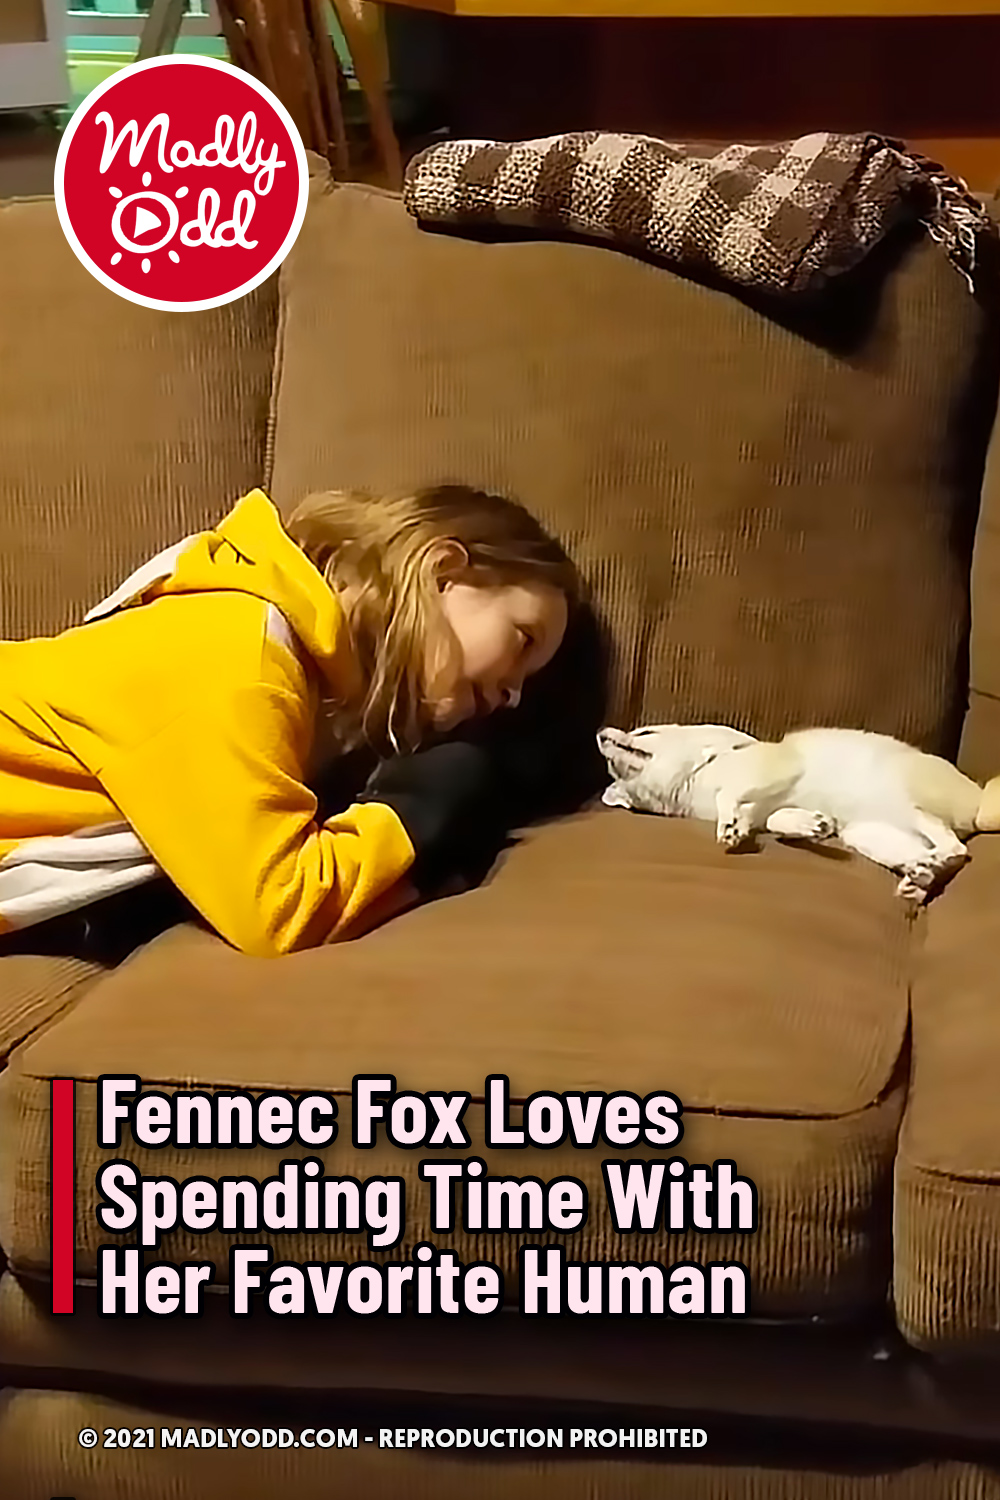 Fennec Fox Loves Spending Time With Her Favorite Human